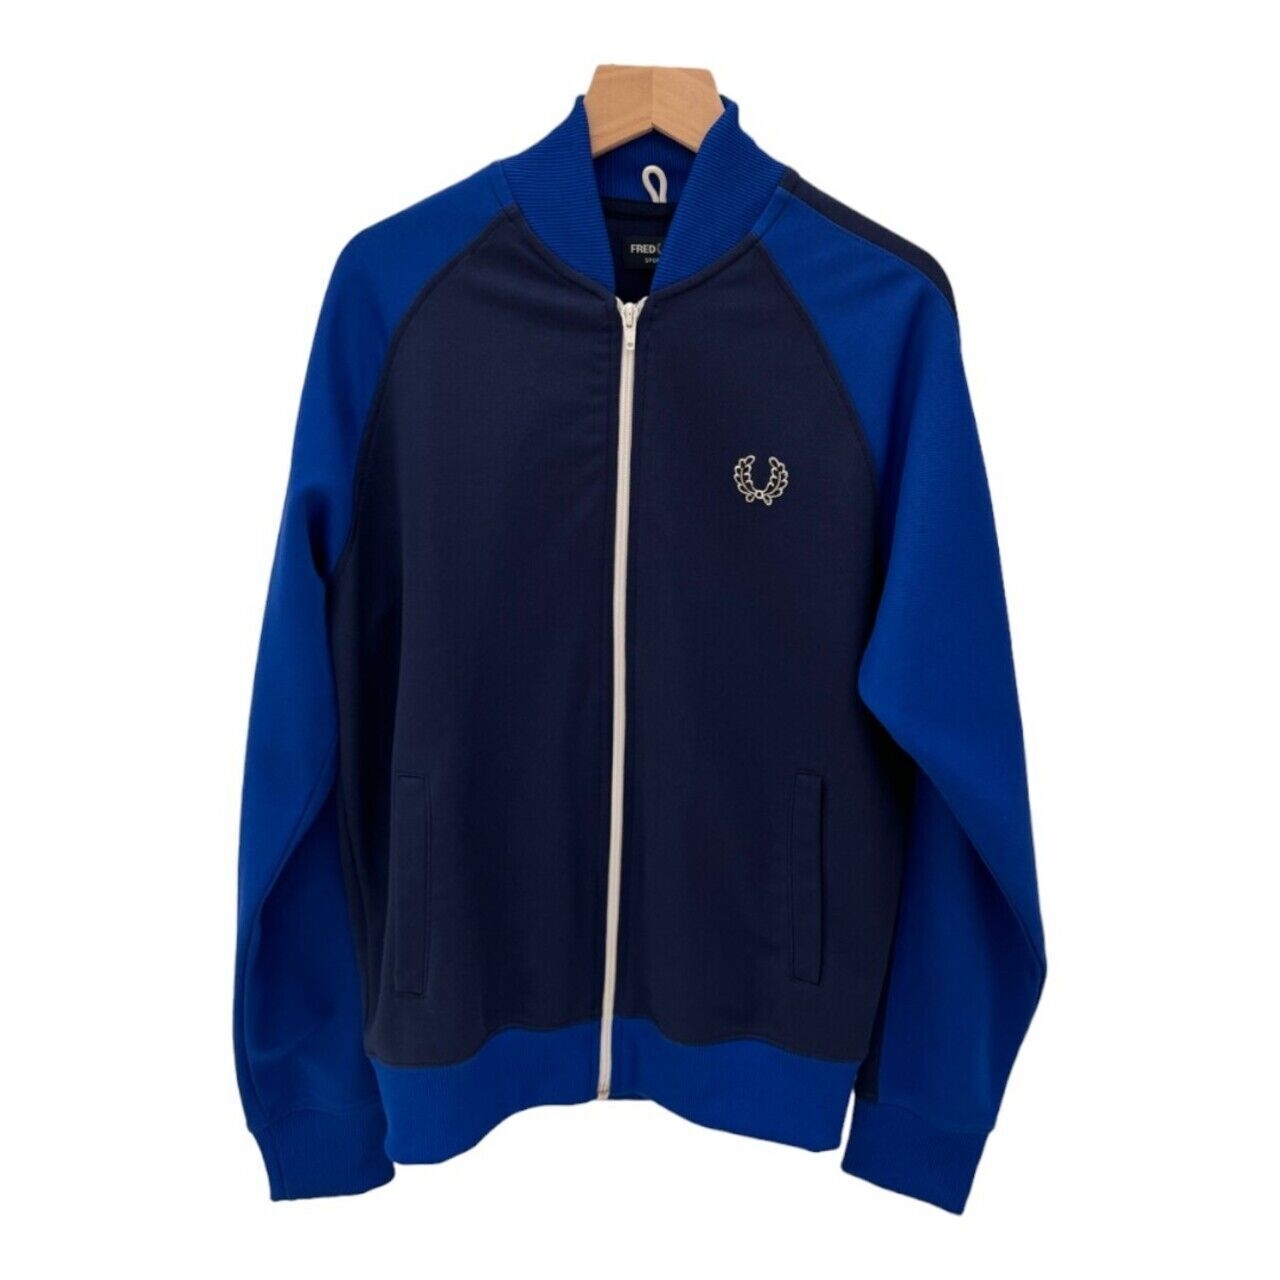 Fred Perry Navy Jaket